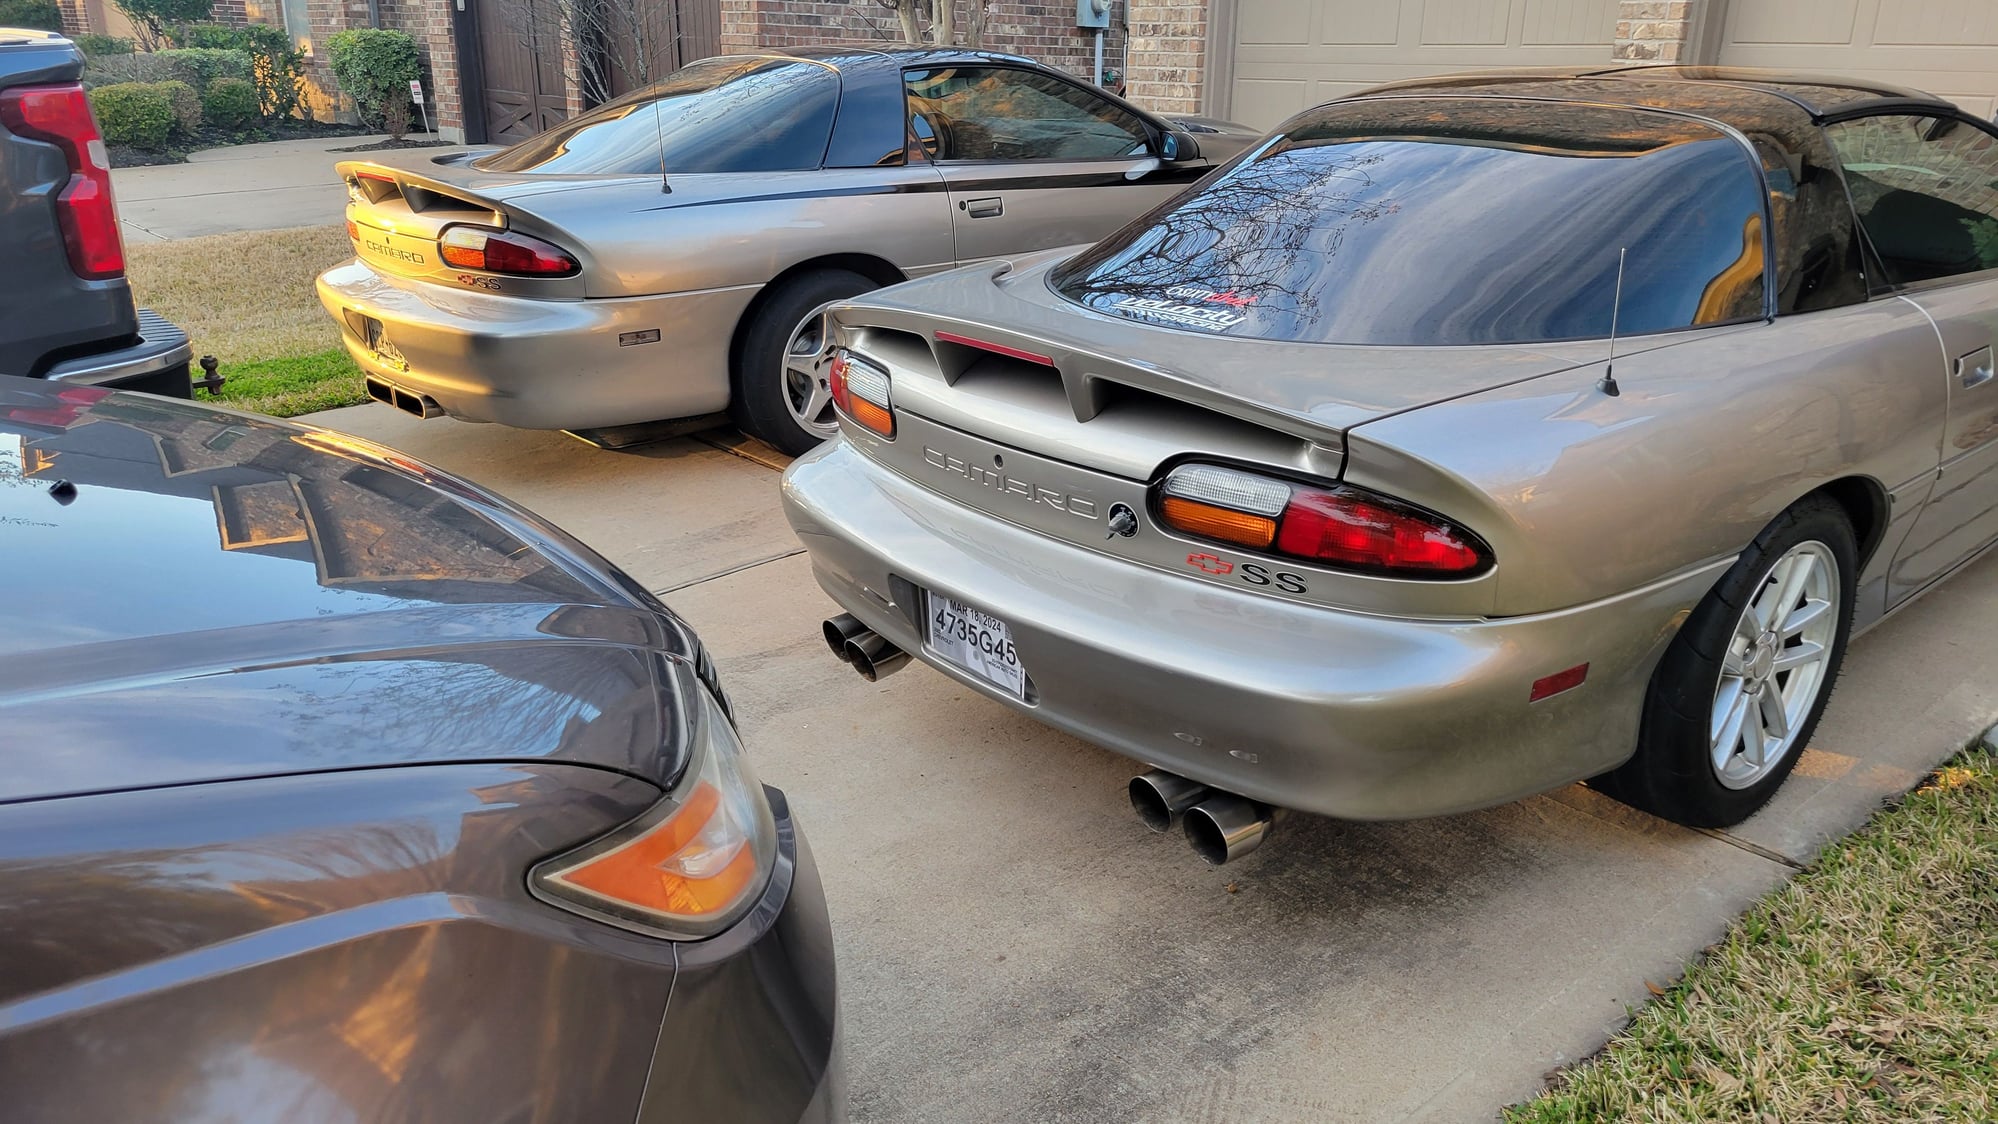 2002 Chevrolet Camaro - 2002 Camaro SS TTop Coupe - Used - VIN 2G1FP22G222104477 - 97,000 Miles - 8 cyl - 2WD - Automatic - Coupe - Beige - Katy, TX 77494, United States